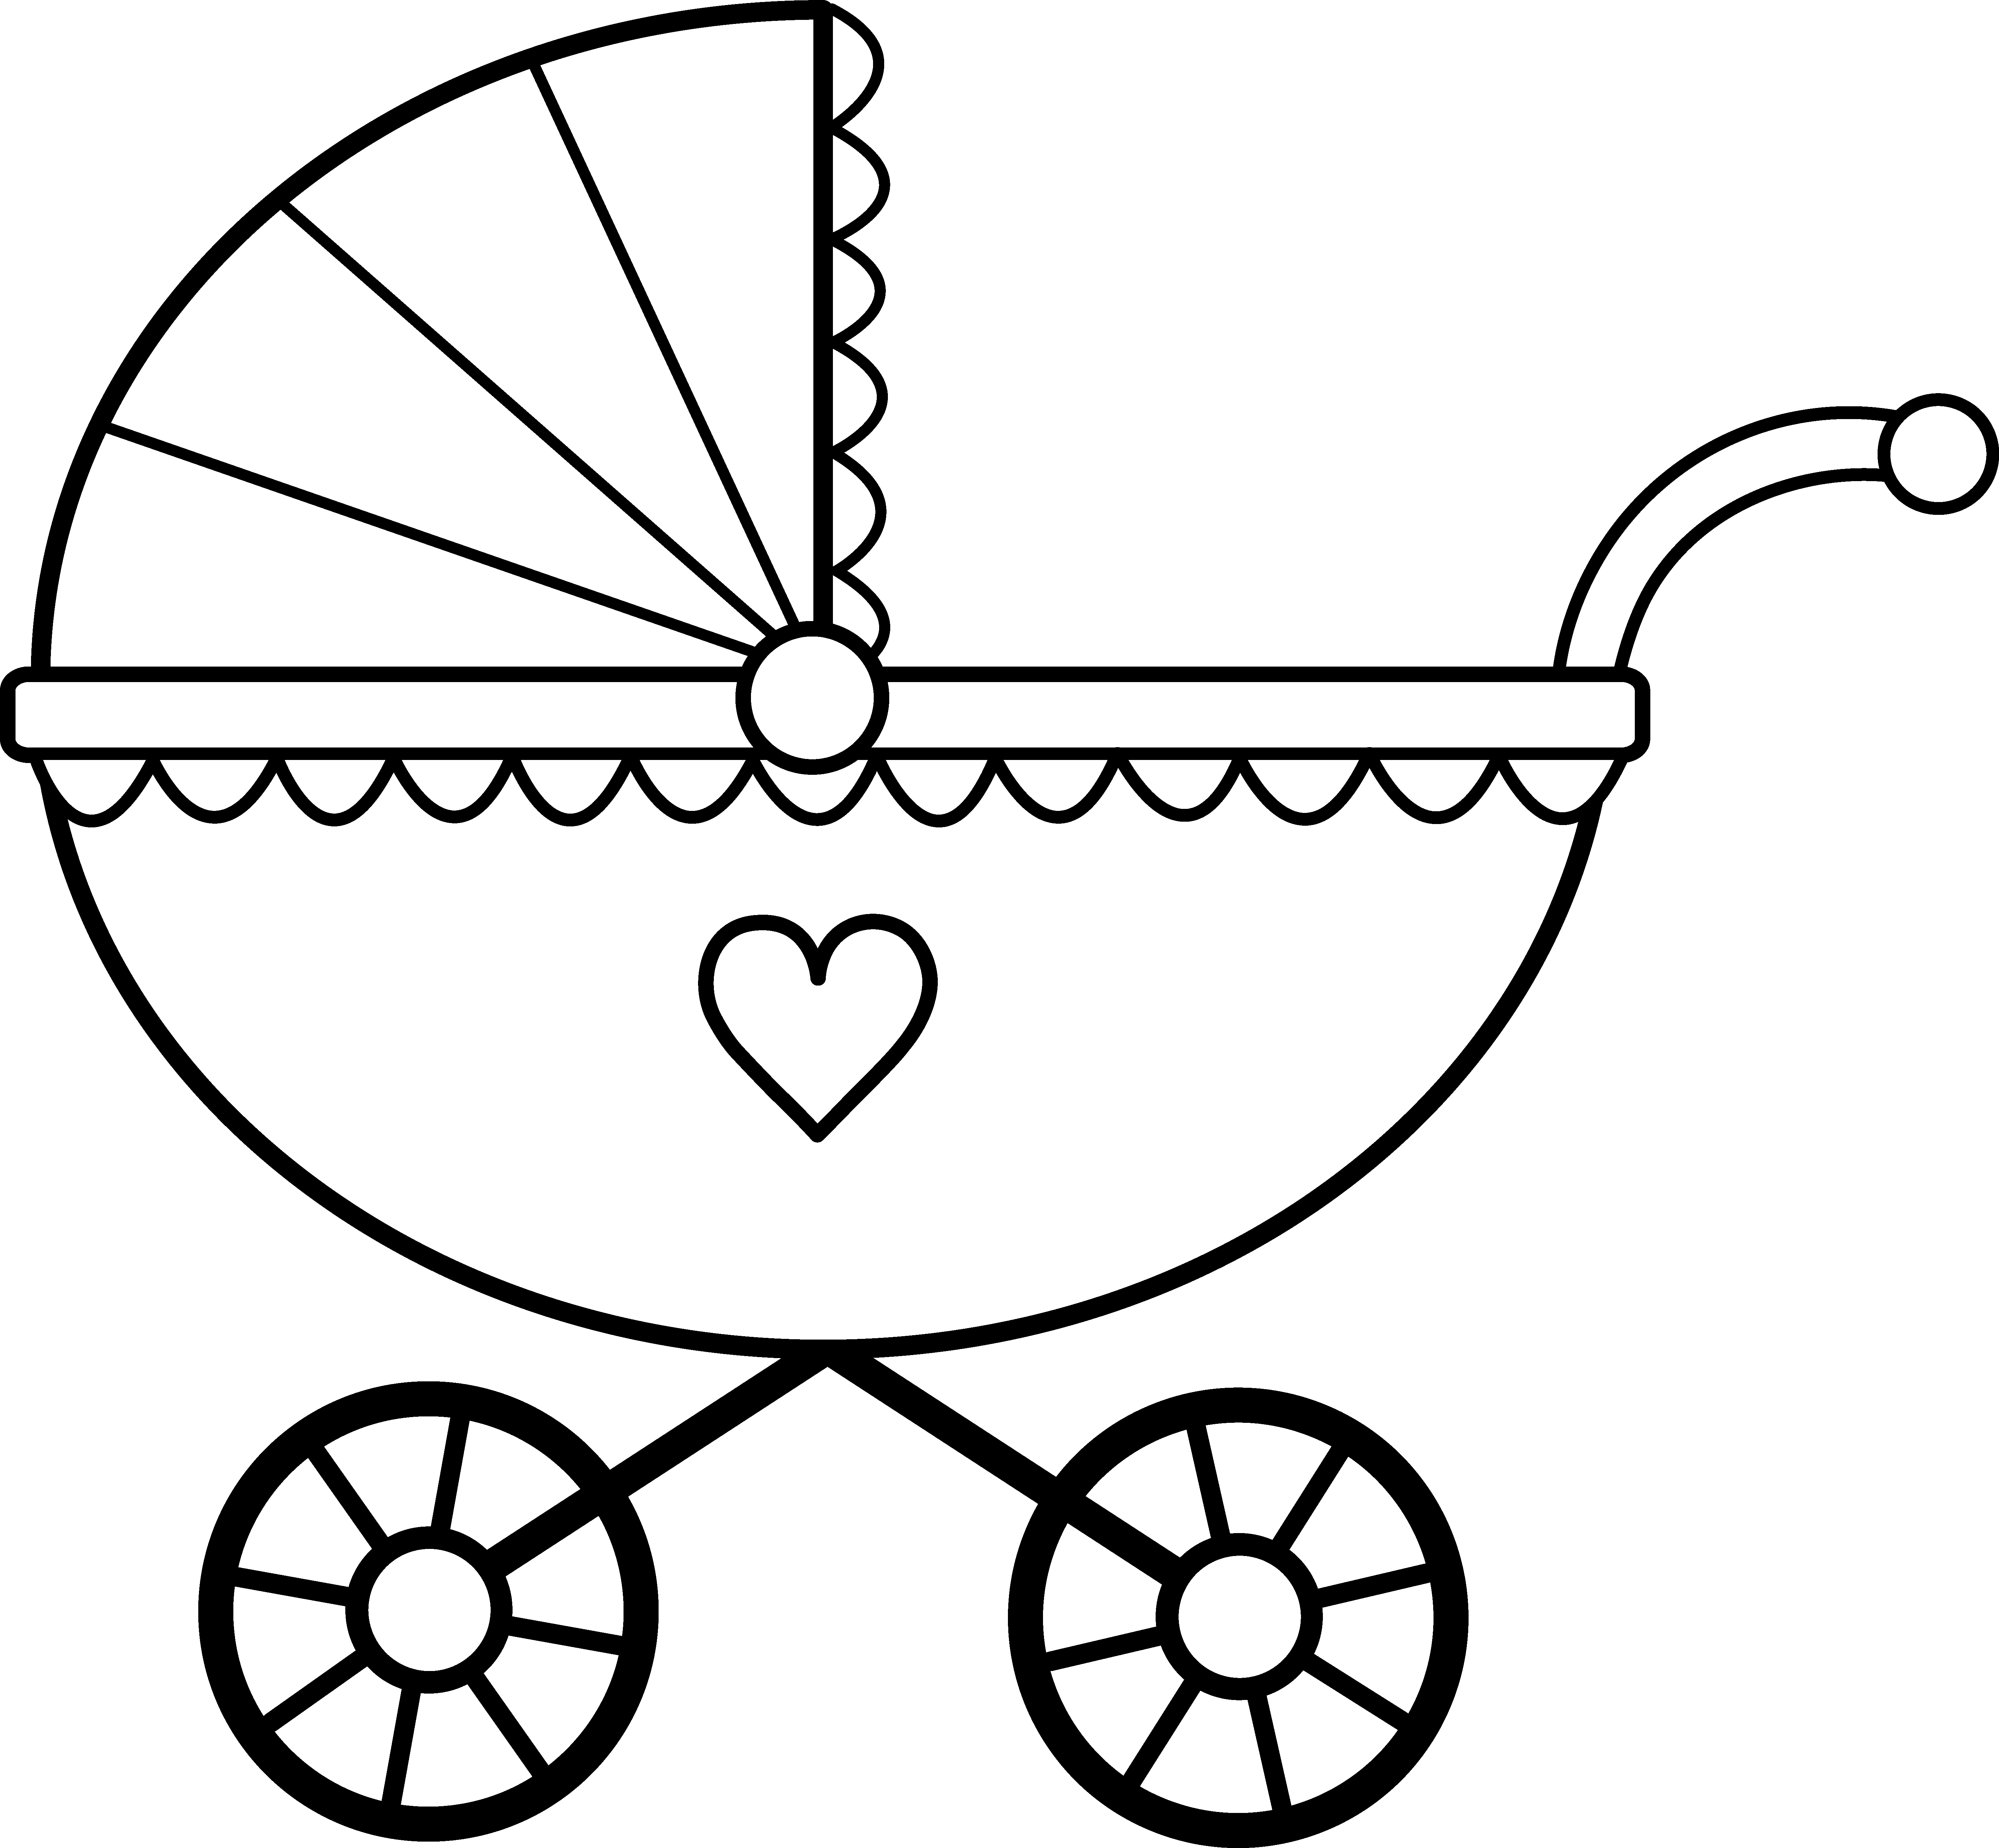 Oven clipart black and white. Baby line drawing at